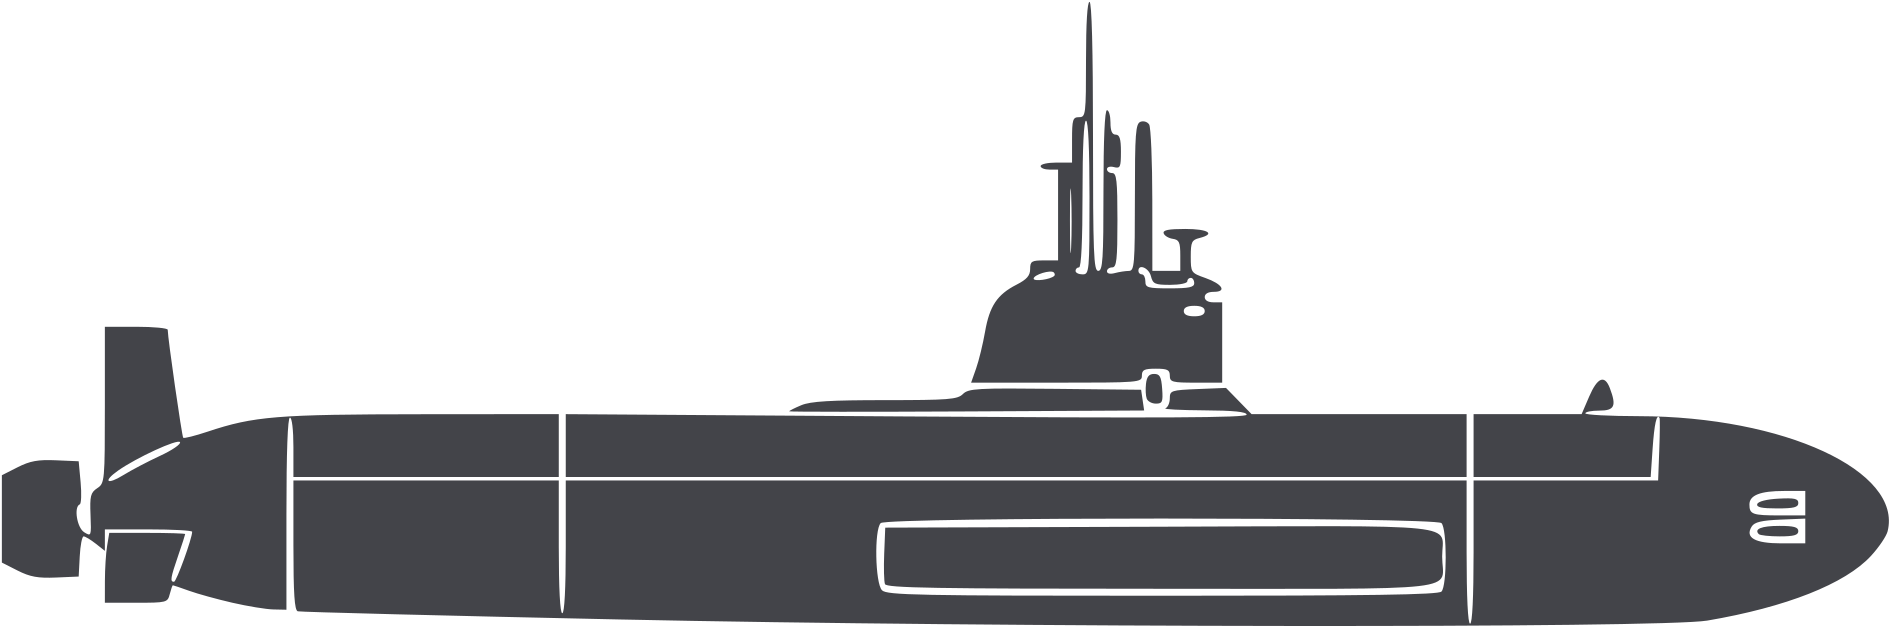 Submarine PNG Clipart Background